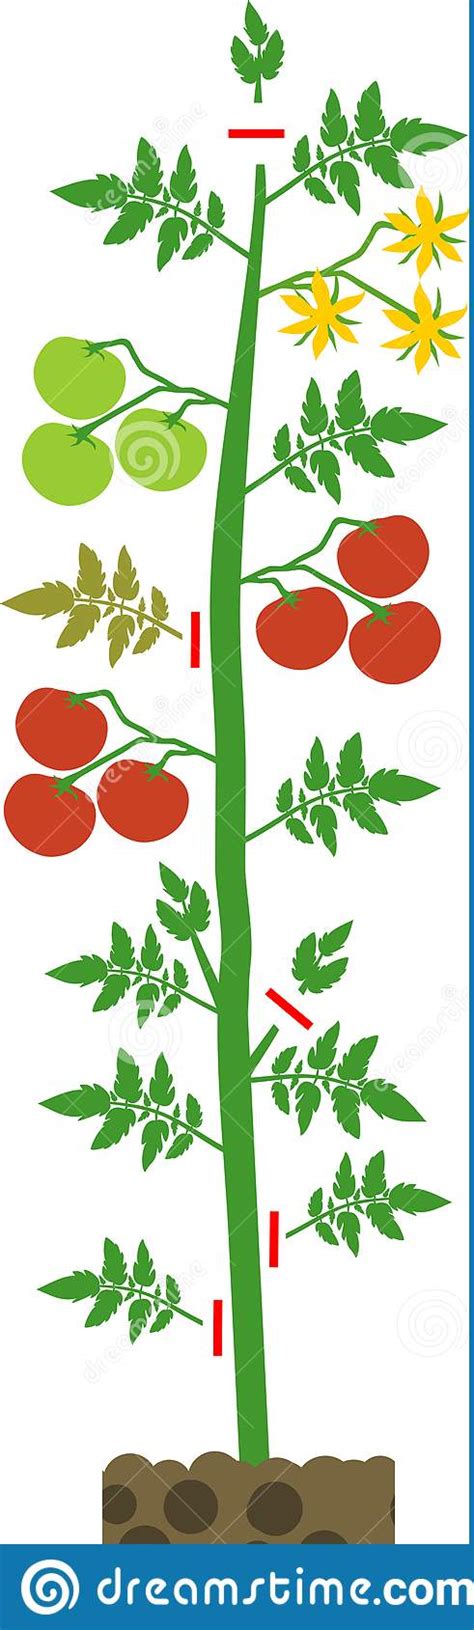 How To Prune Tomatoes Plant Tomato Pruning Scheme Stock